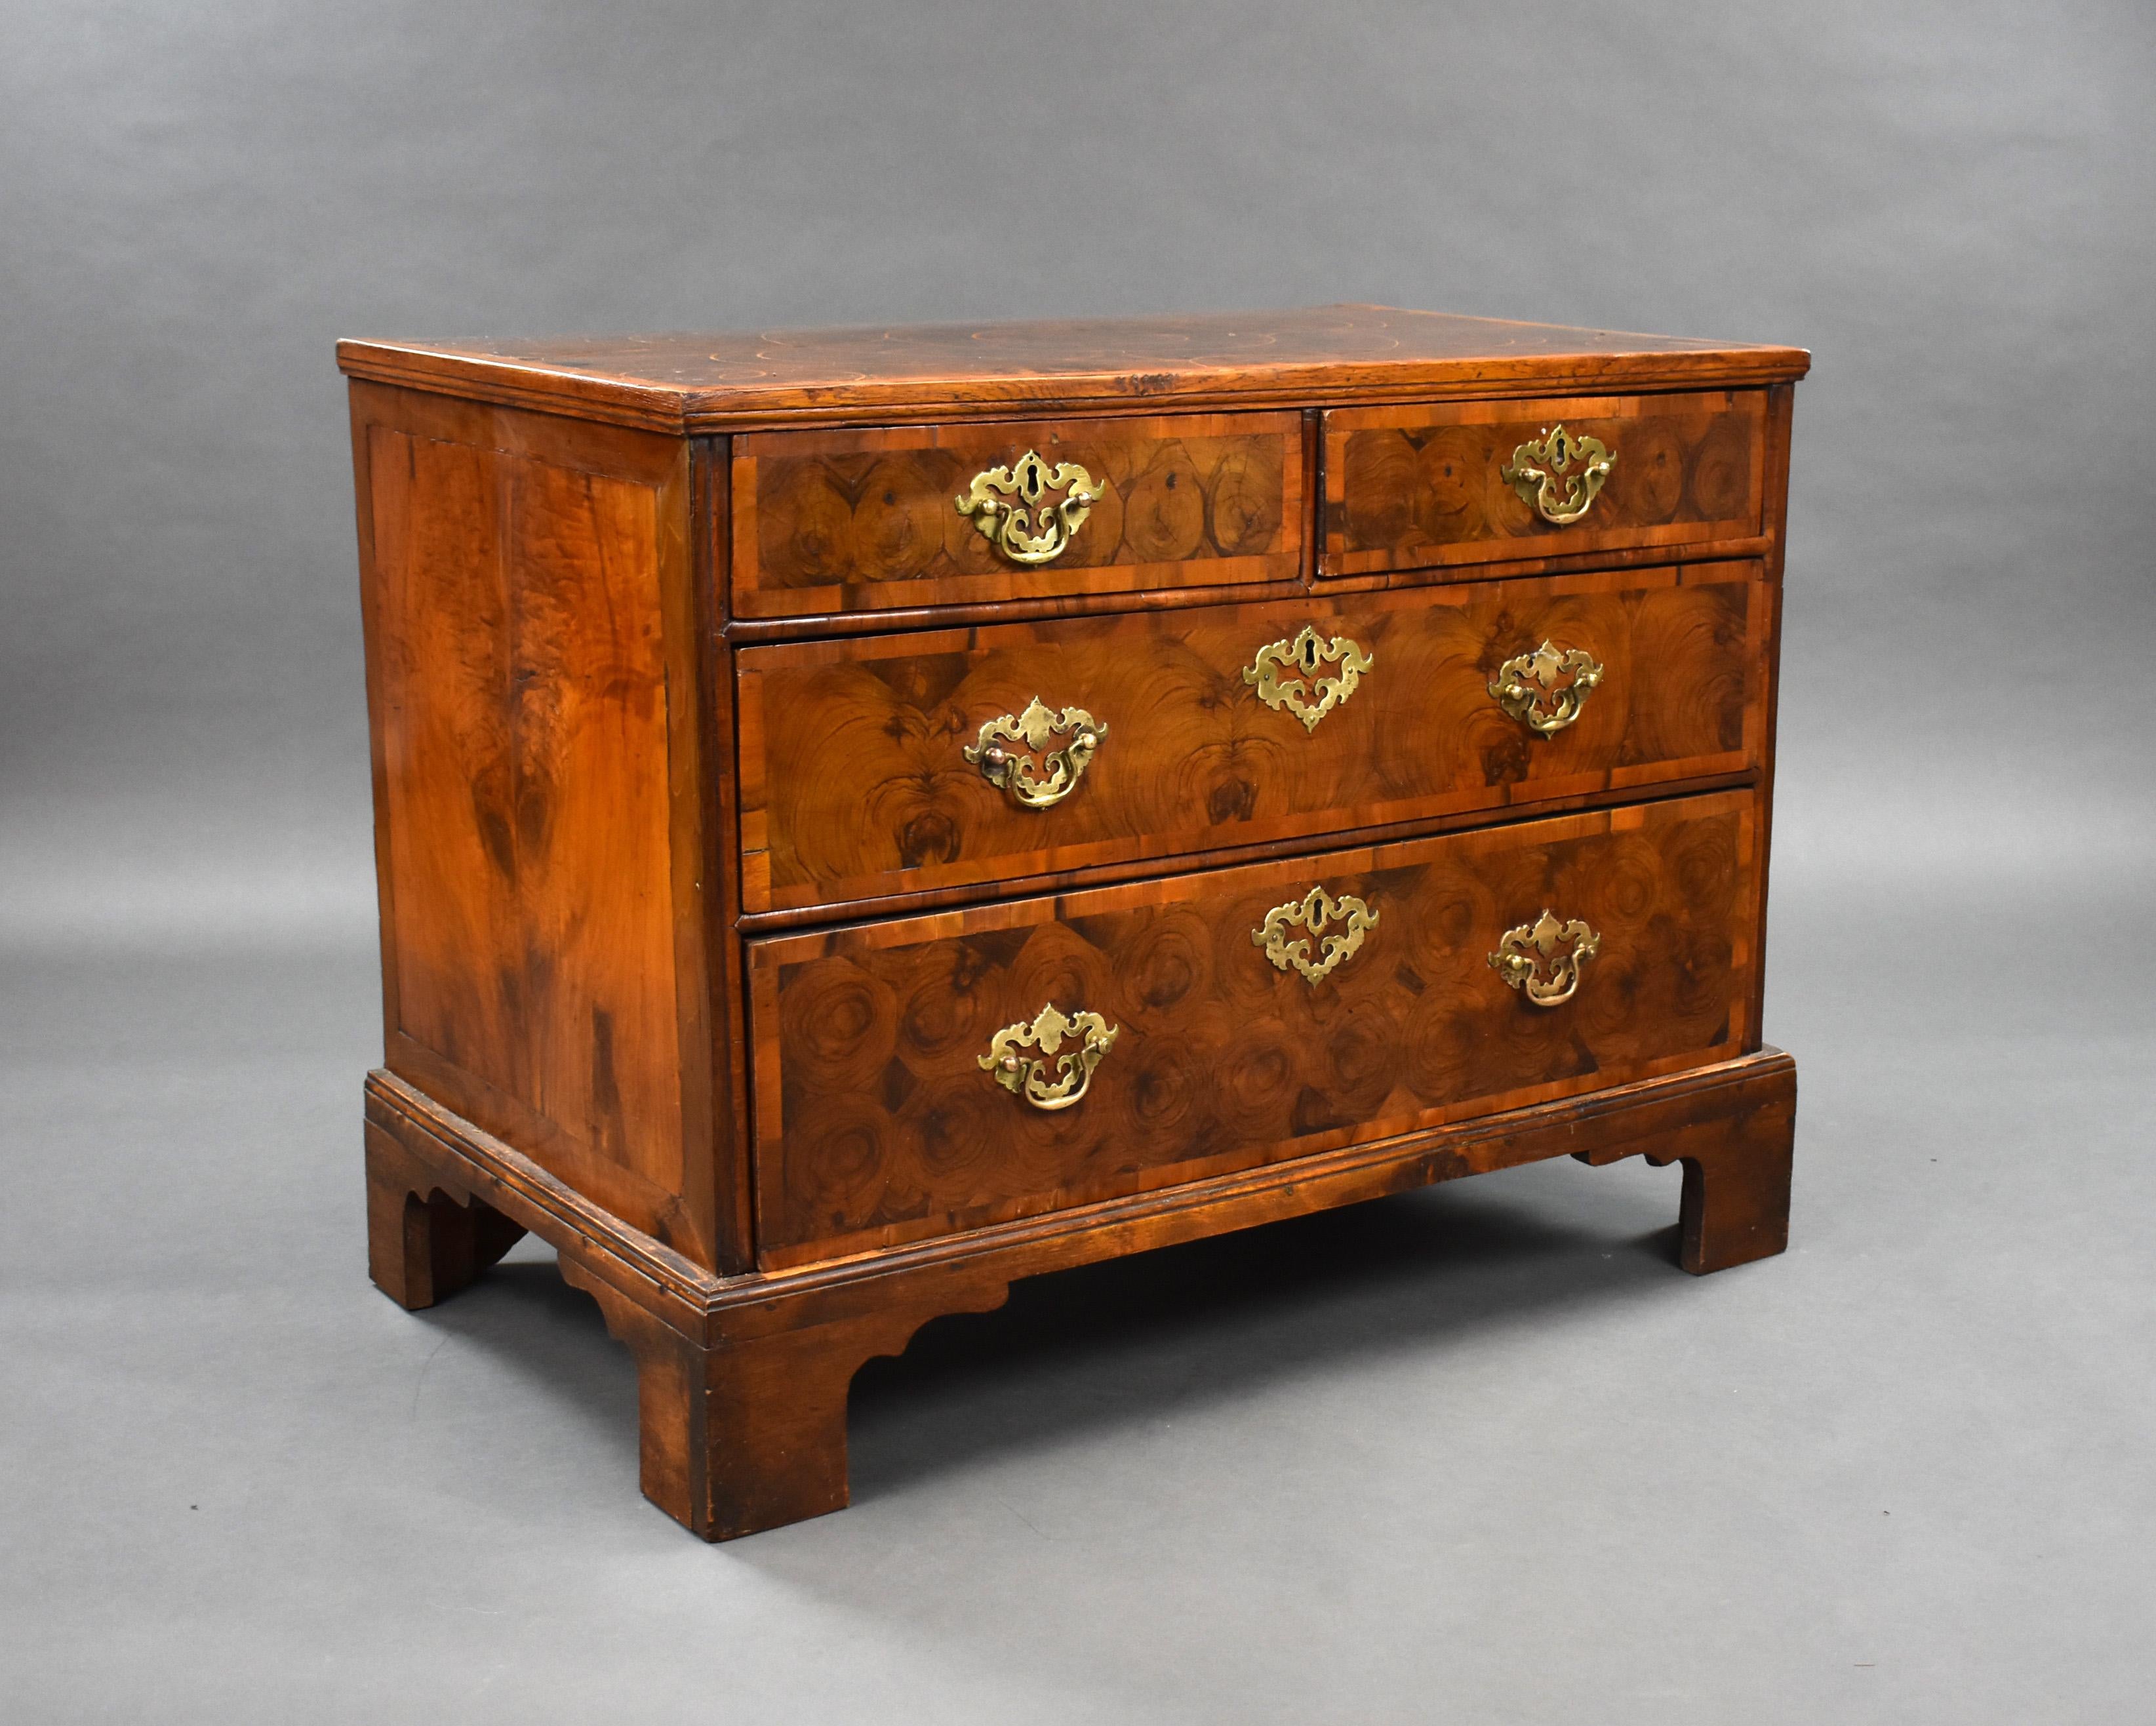 For sale is a good quality early 18th century oyster veneered walnut and laburnum chest of two short and two long graduated drawers, standing on bracket feet the chest remains in good condition, showing minor signs of wear commensurate with age and